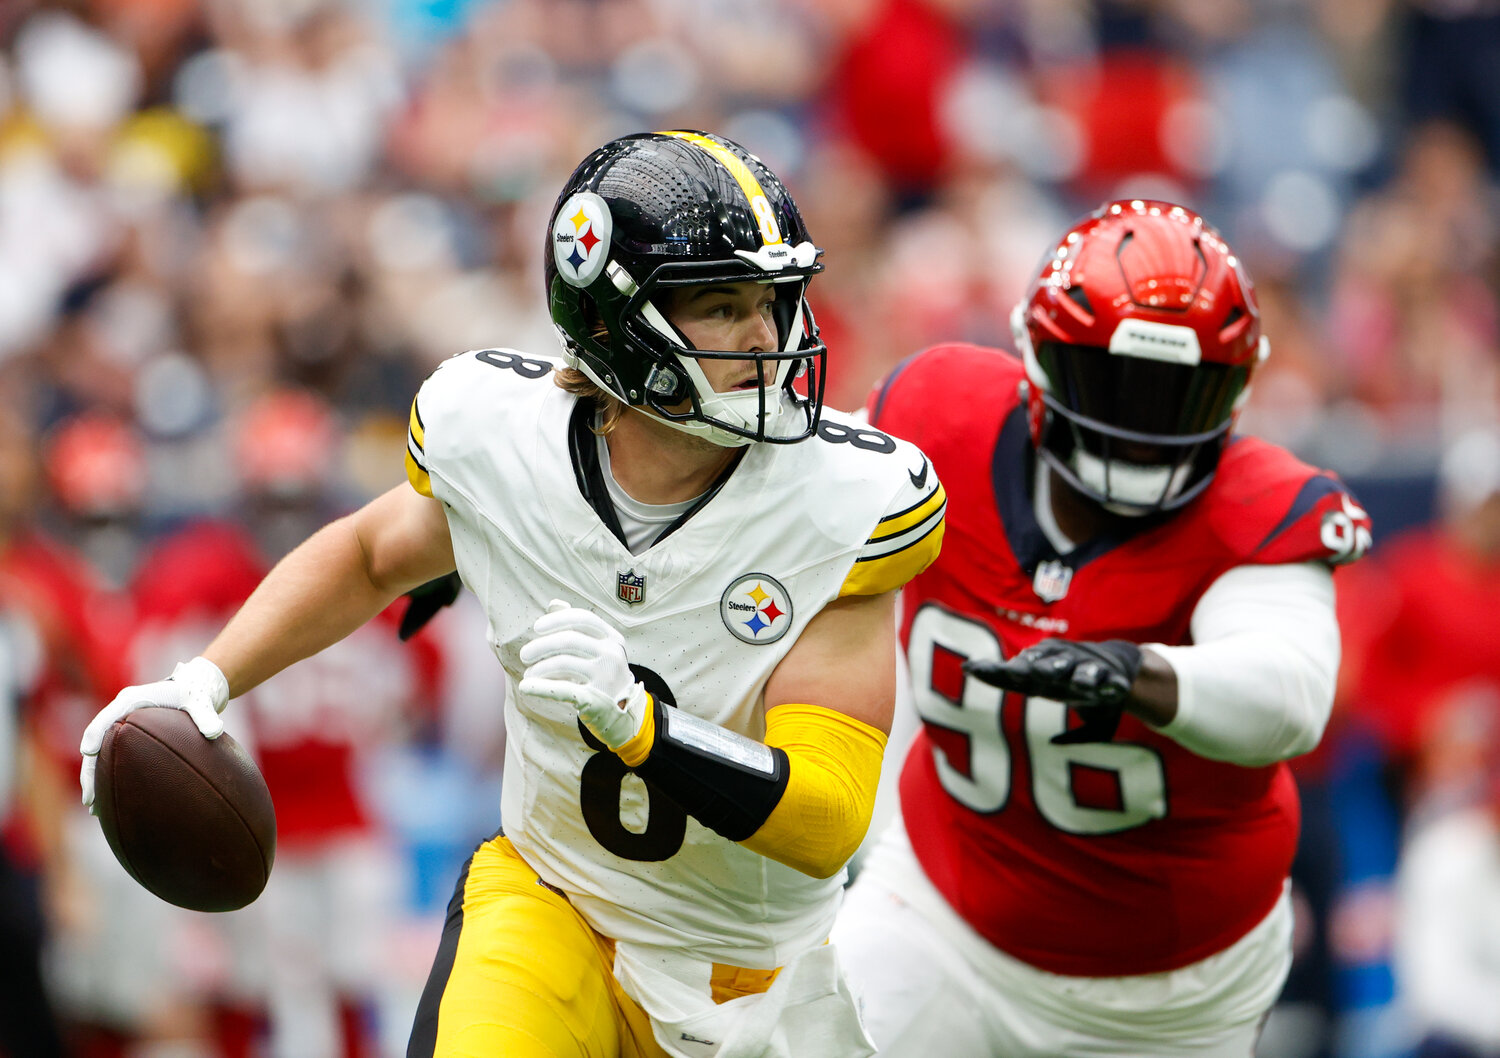 Texans defensive tackle Maliek Collins (96) pursues Steelers quarterback Kenny Pickett (8) in the backfield during an NFL game between the Texans and the Steelers on October 1, 2023 in Houston.